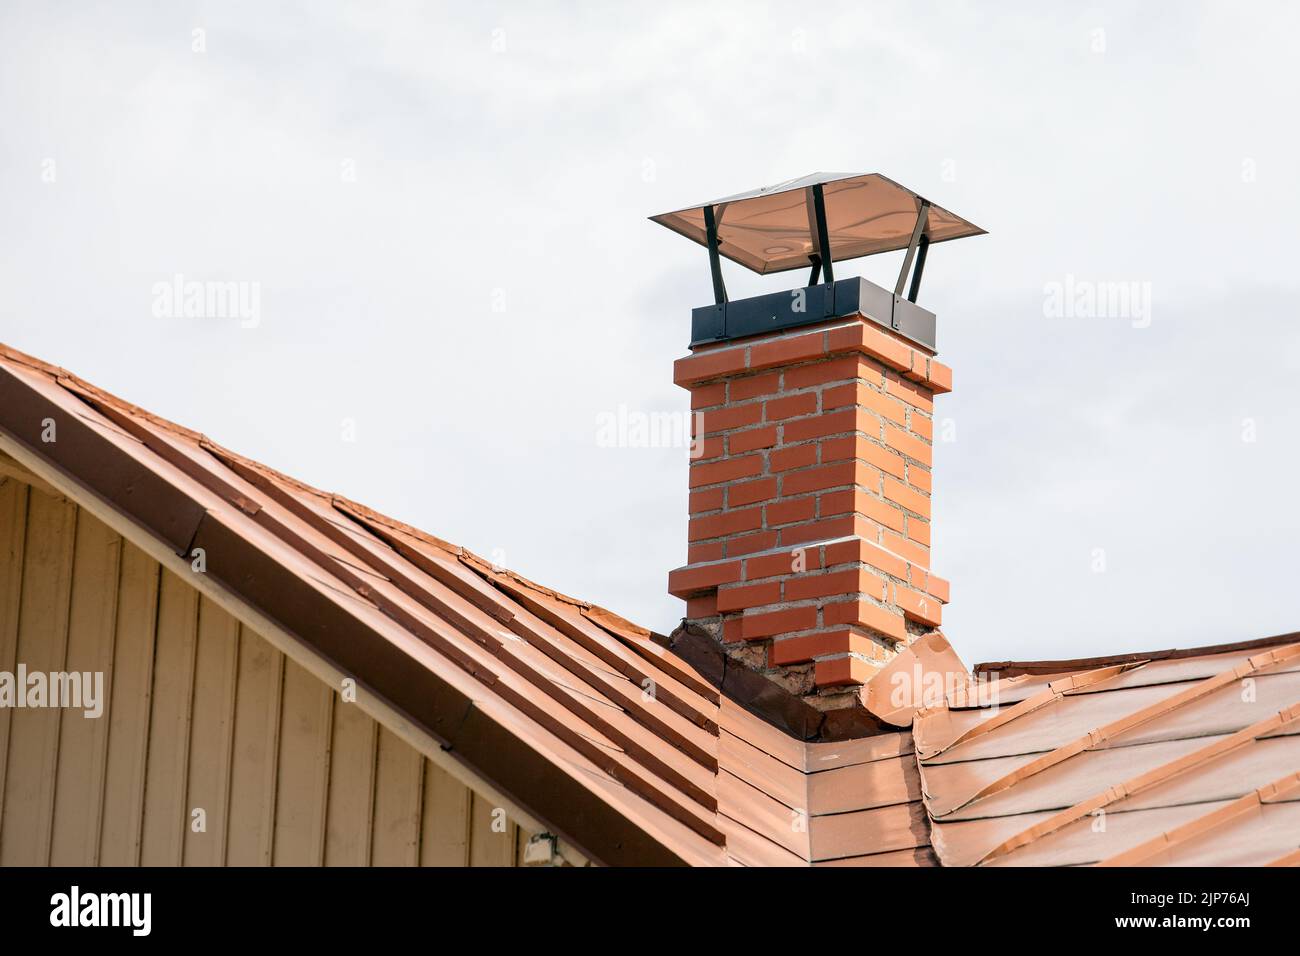 Red brick chimney with a metal roof. Stock Photo